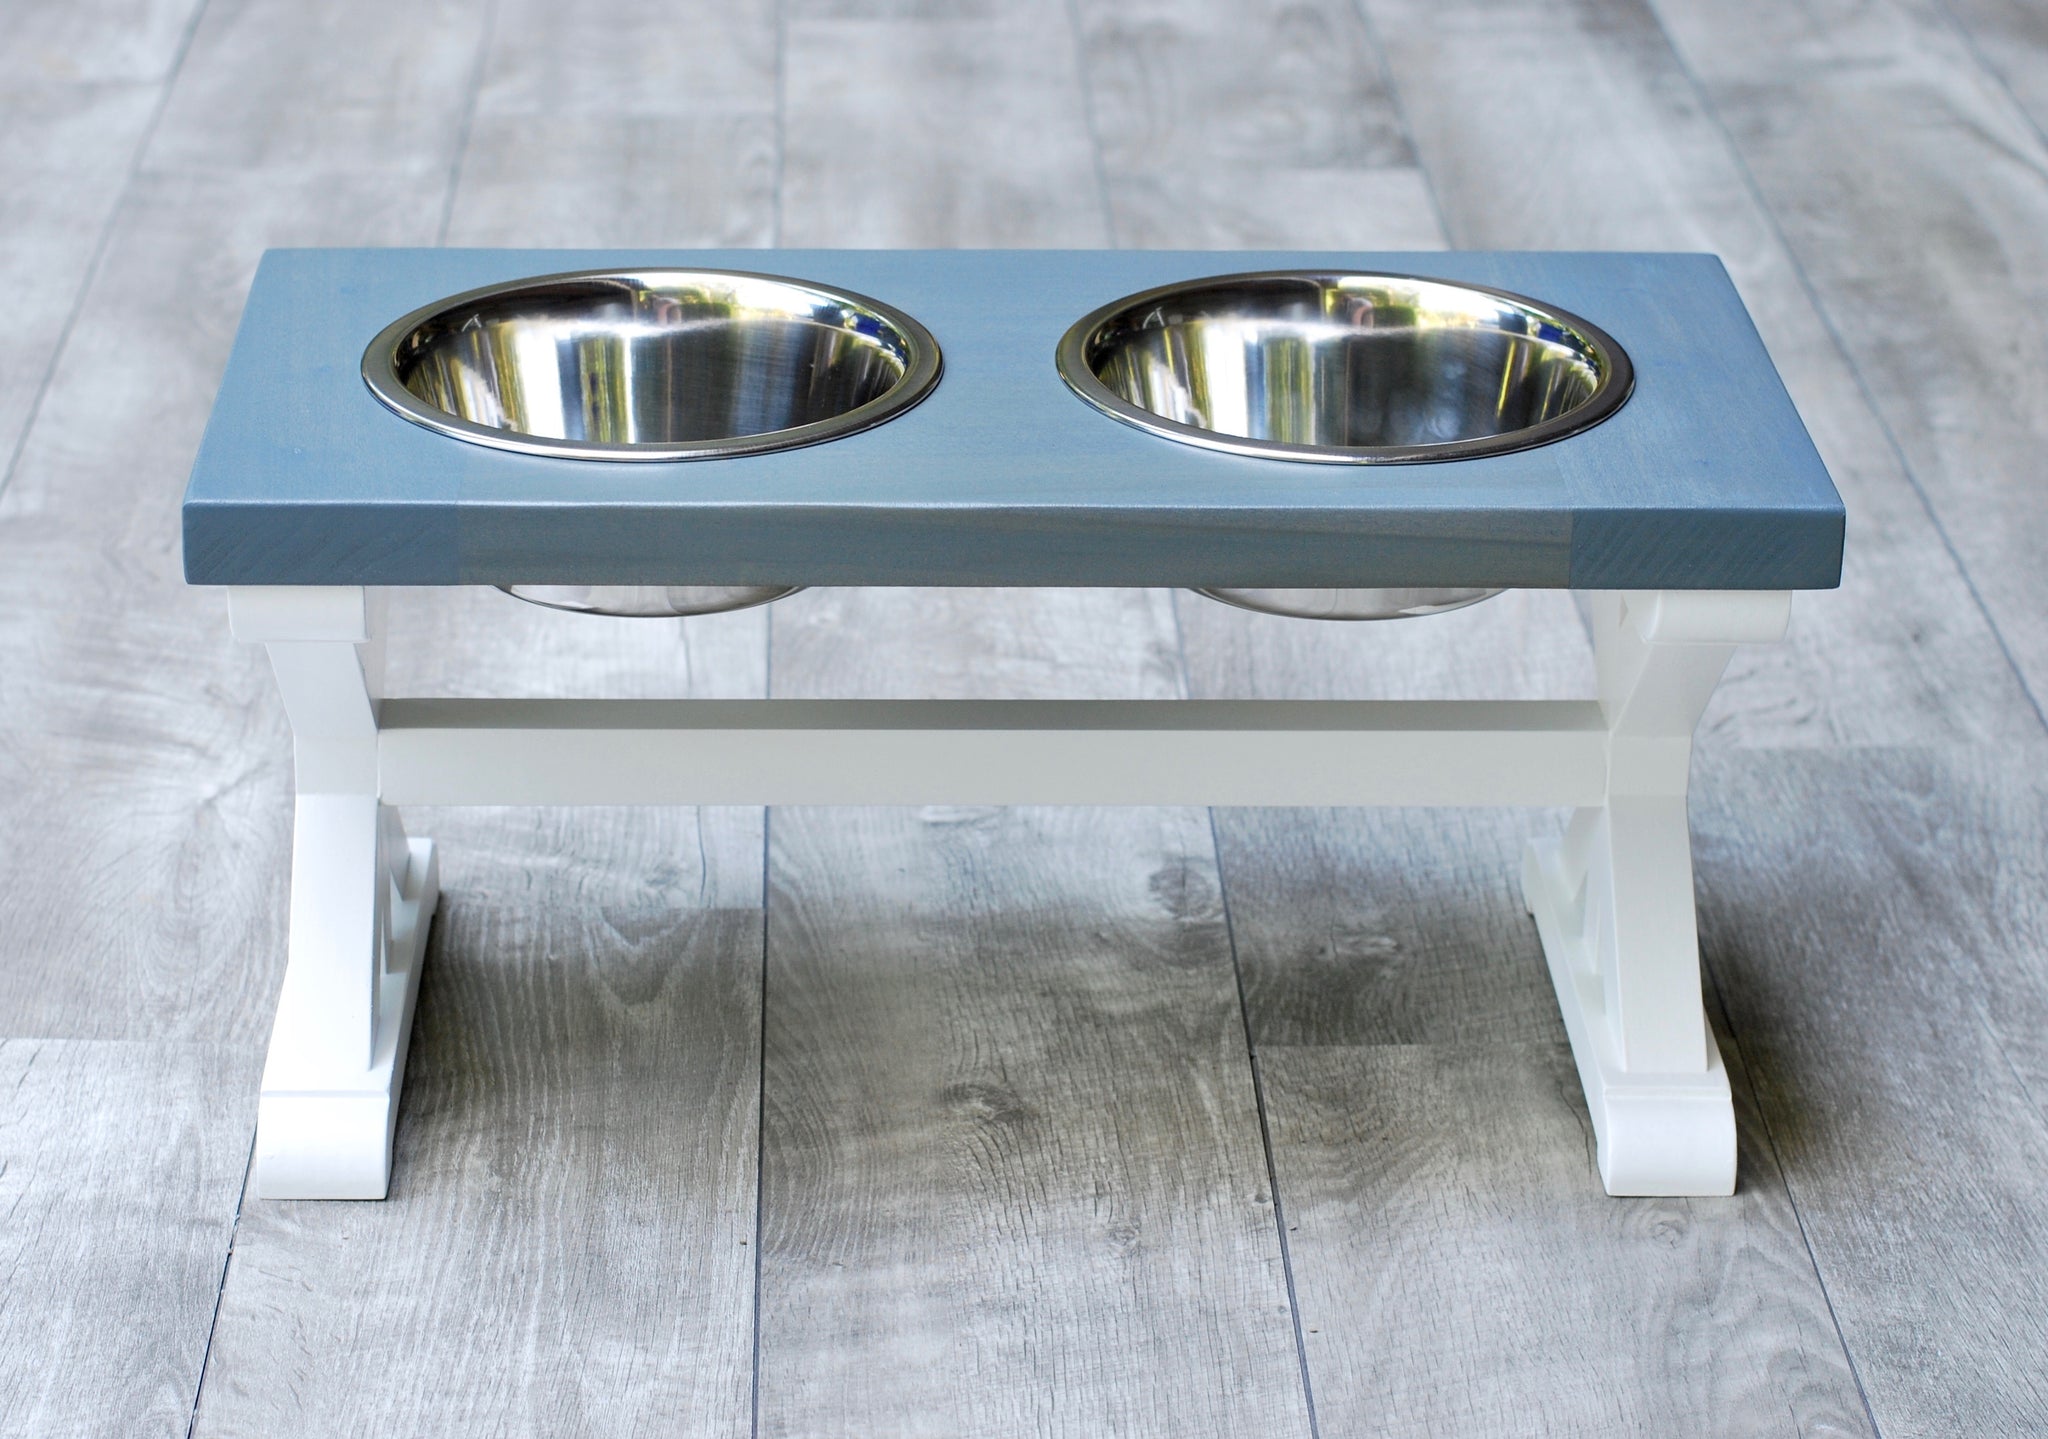 Large Elevated Dog Bowl Stand - Trestle Farmhouse Table Dog Bowl Stand -  billscustombuilds